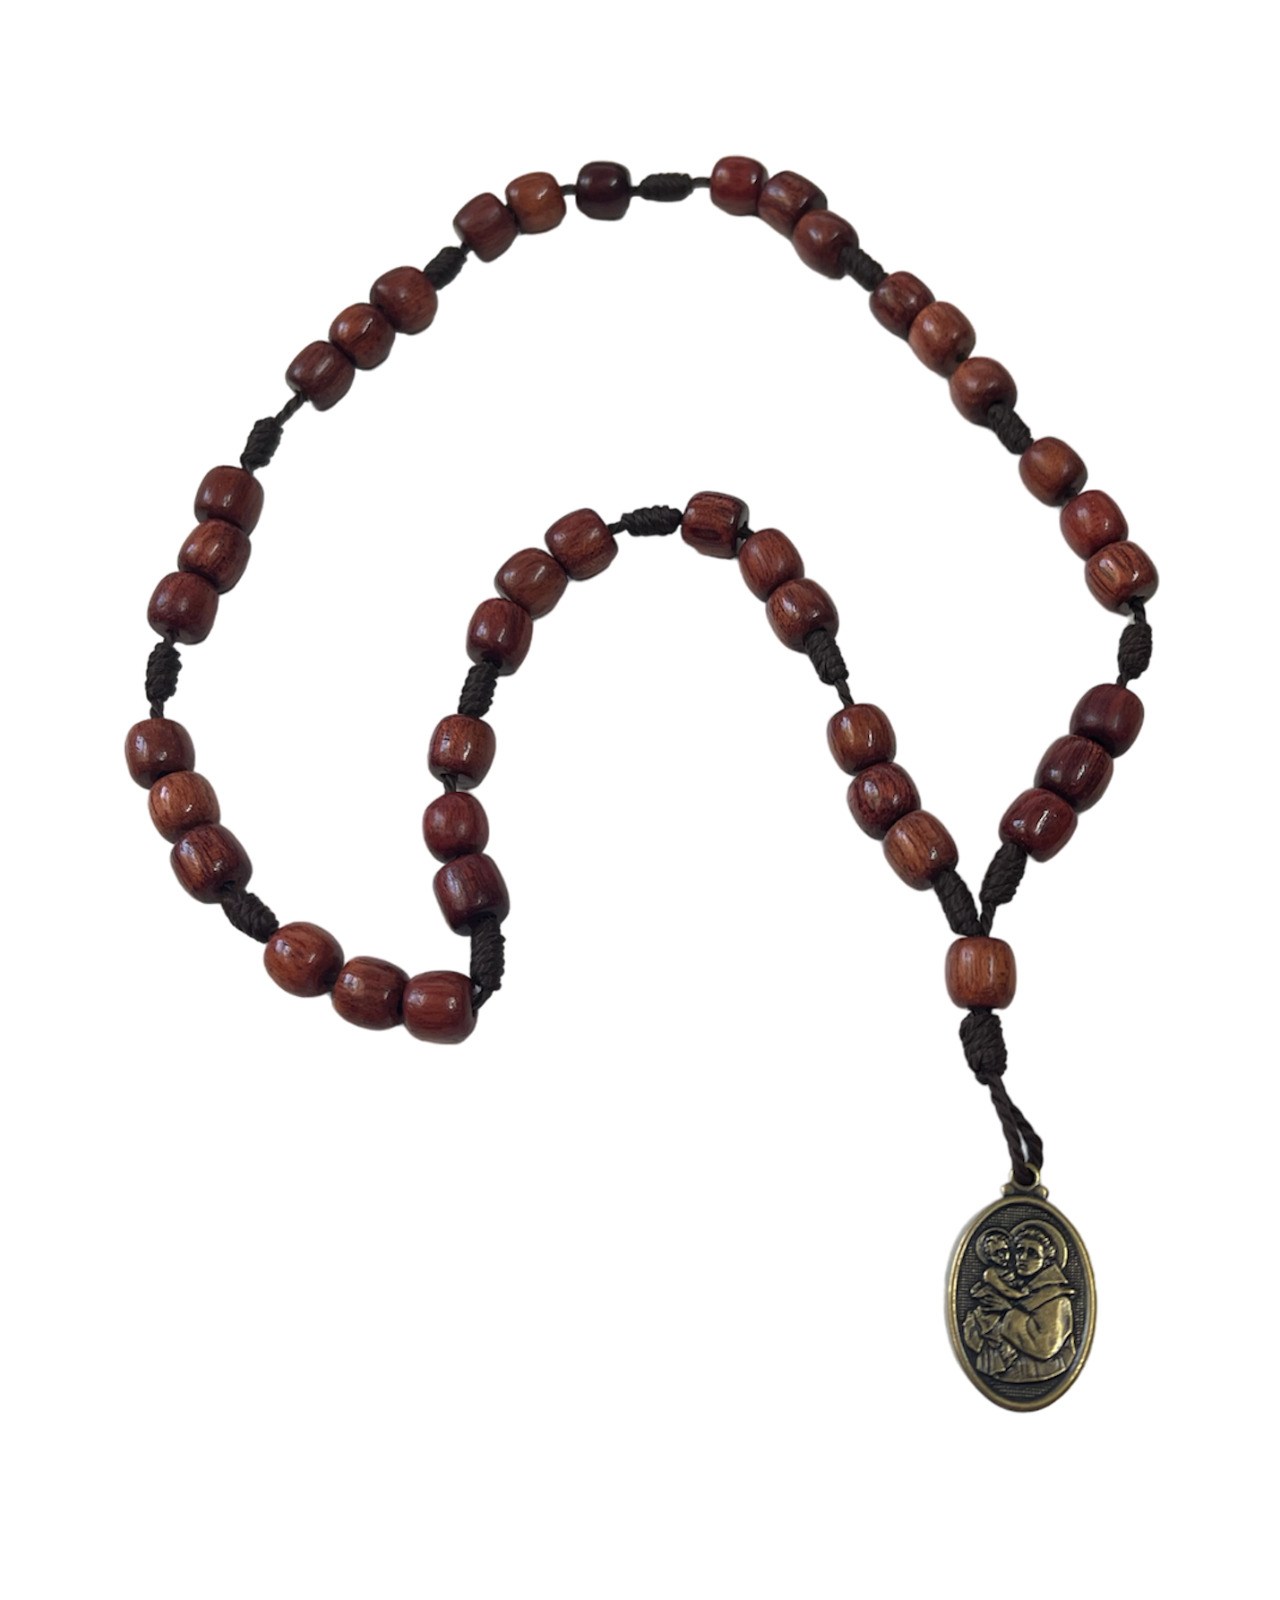 Saint St Anthony Chaplet Rosary for Prayer with Cherry Wood Beads and Medal, 9 I